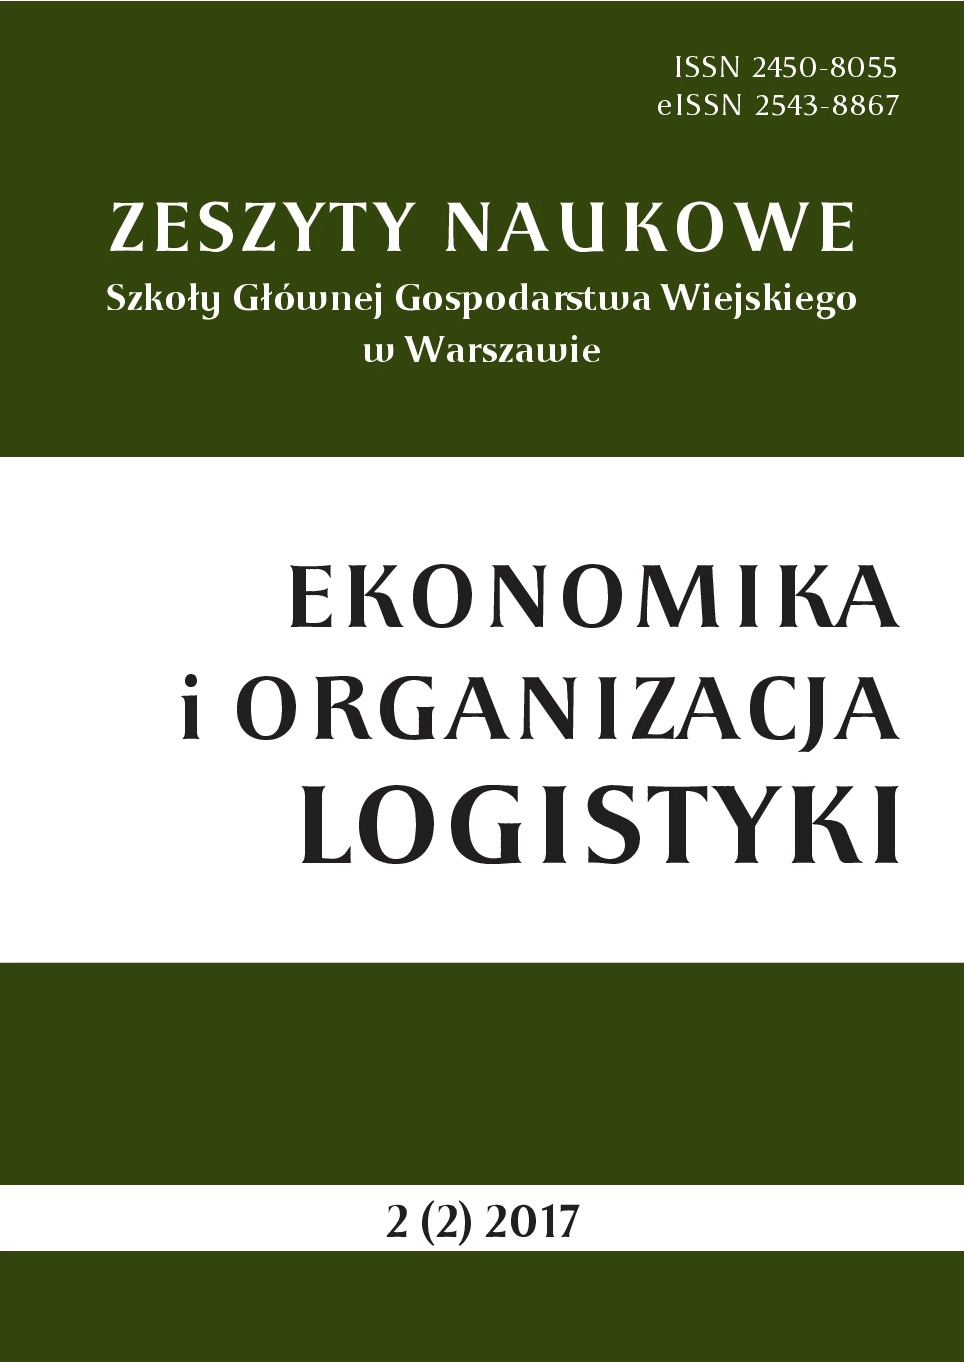 Conditions and changes in the functioning of the supply chain on fruit market in Poland Cover Image